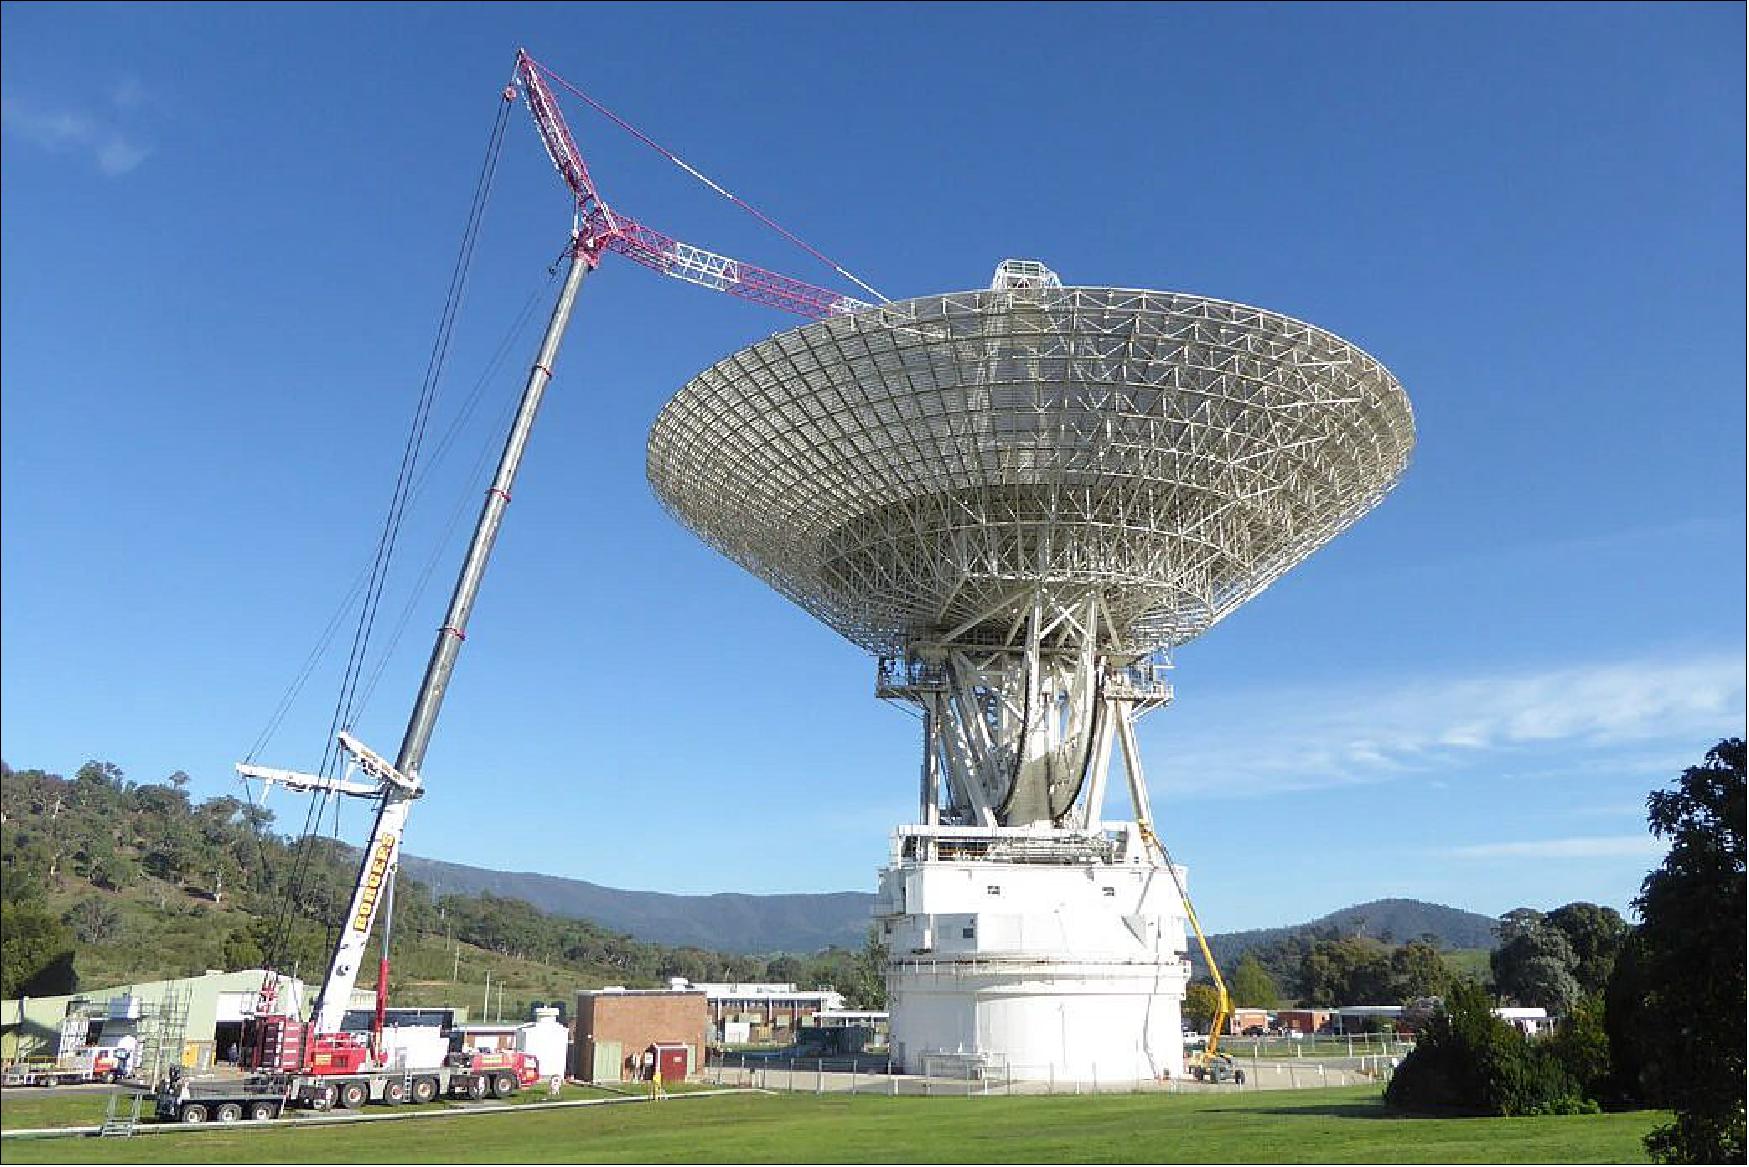 Figure 27: Repairs to the Deep Space Station 43 in Canberra, Australia, the only means of communication with the Voyager 2 spacecraft (image credit: NASA)